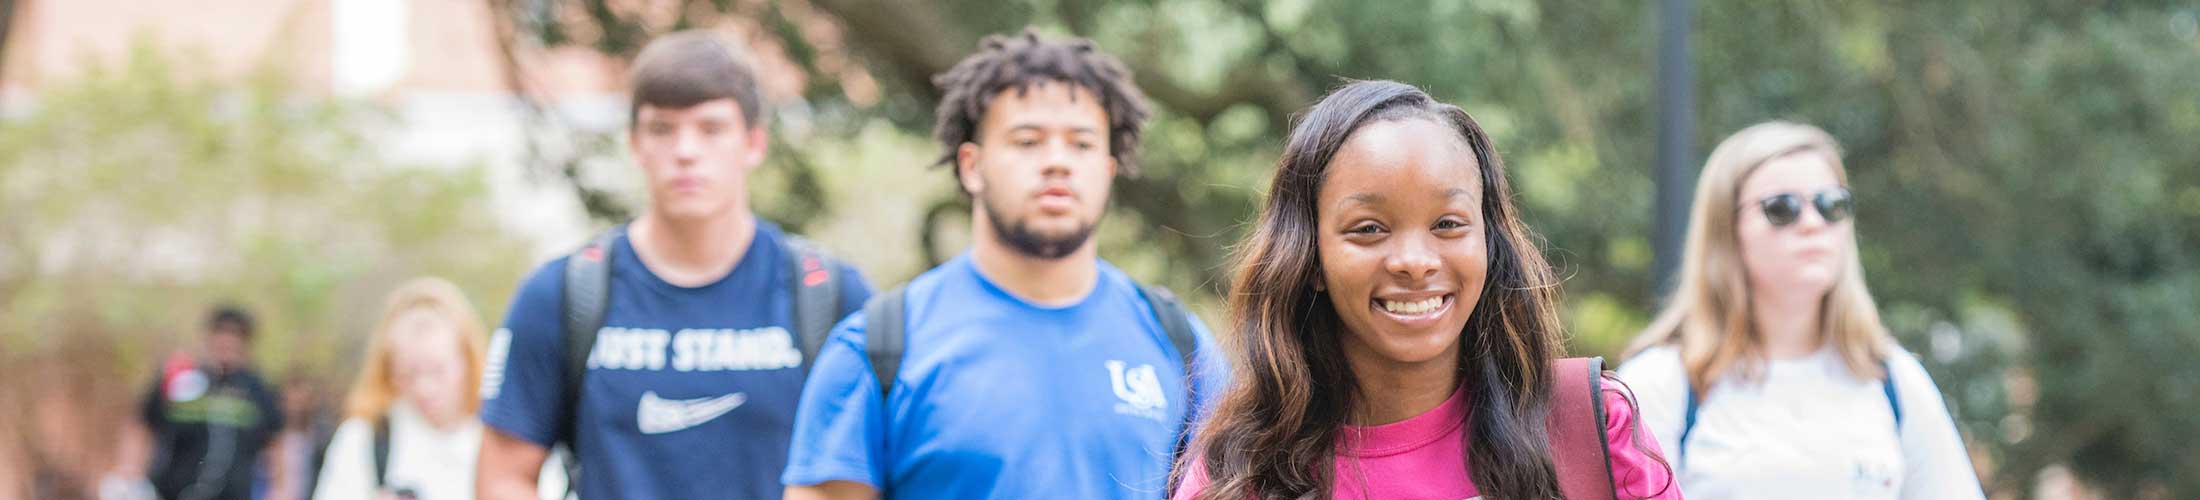 Female student smiling in focus on image with other students walking on USA campus.